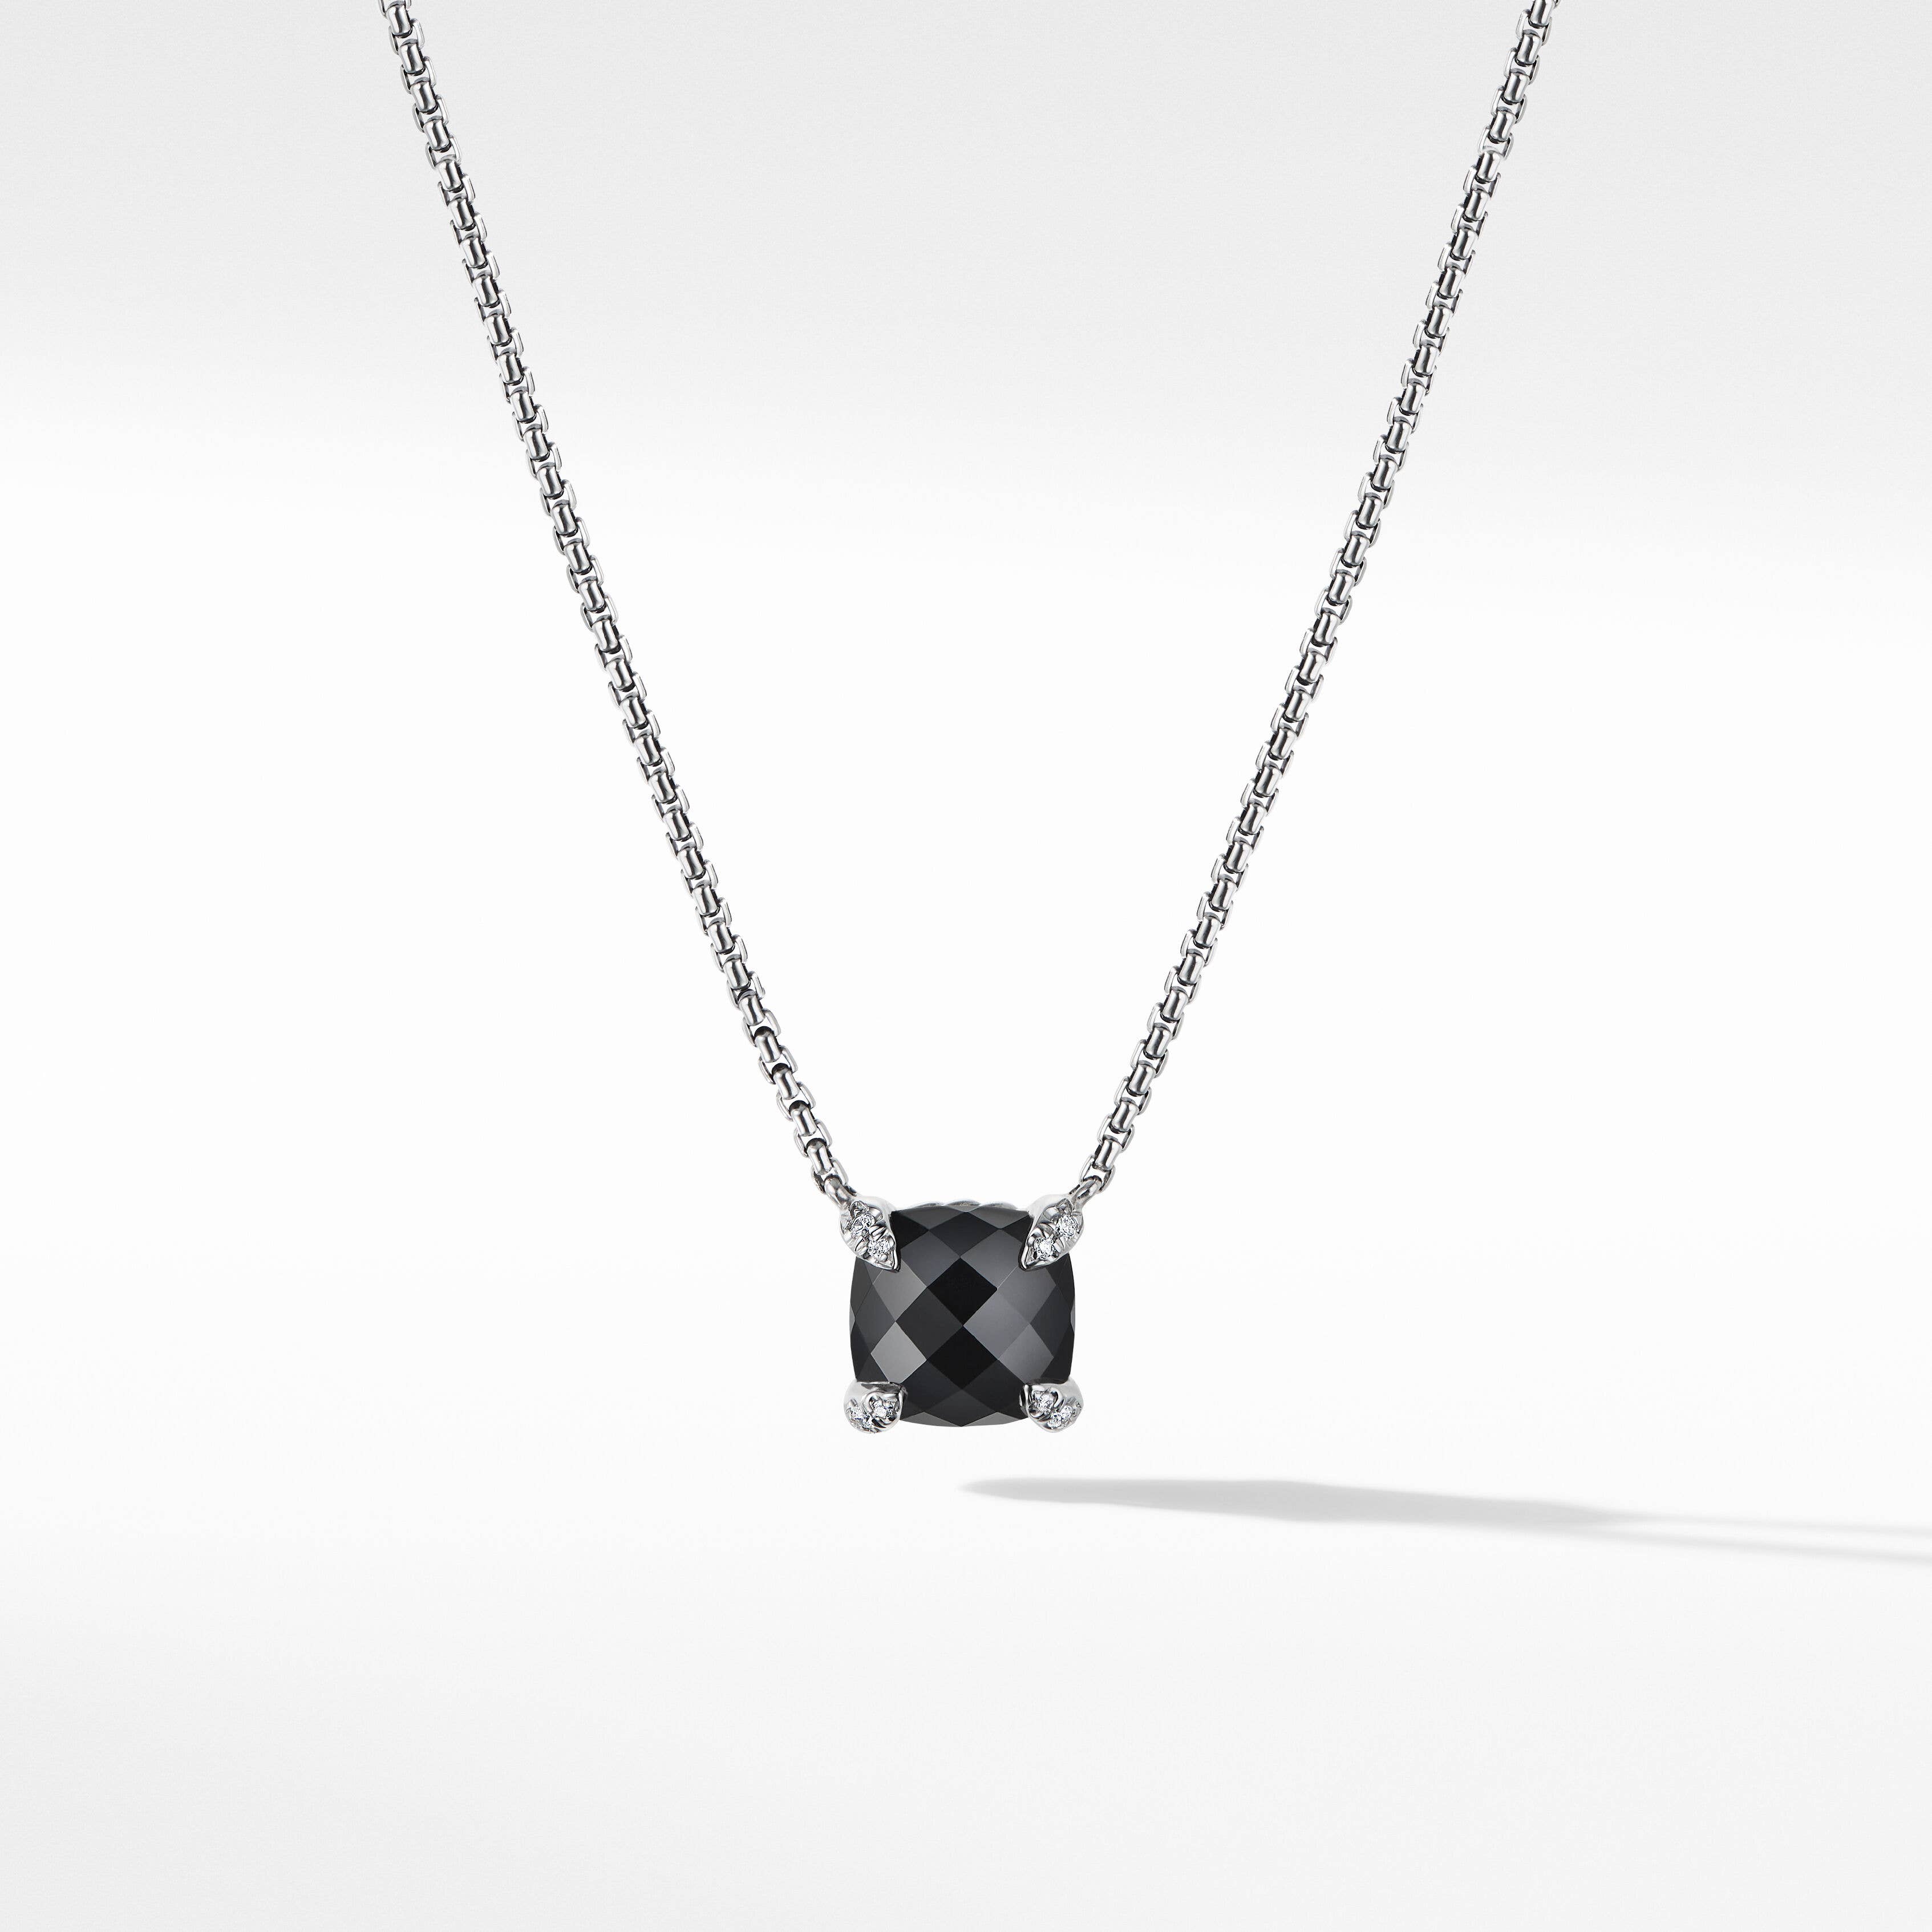 Petite Chatelaine® Pendant Necklace in Sterling Silver with Black Onyx and Pavé Diamonds